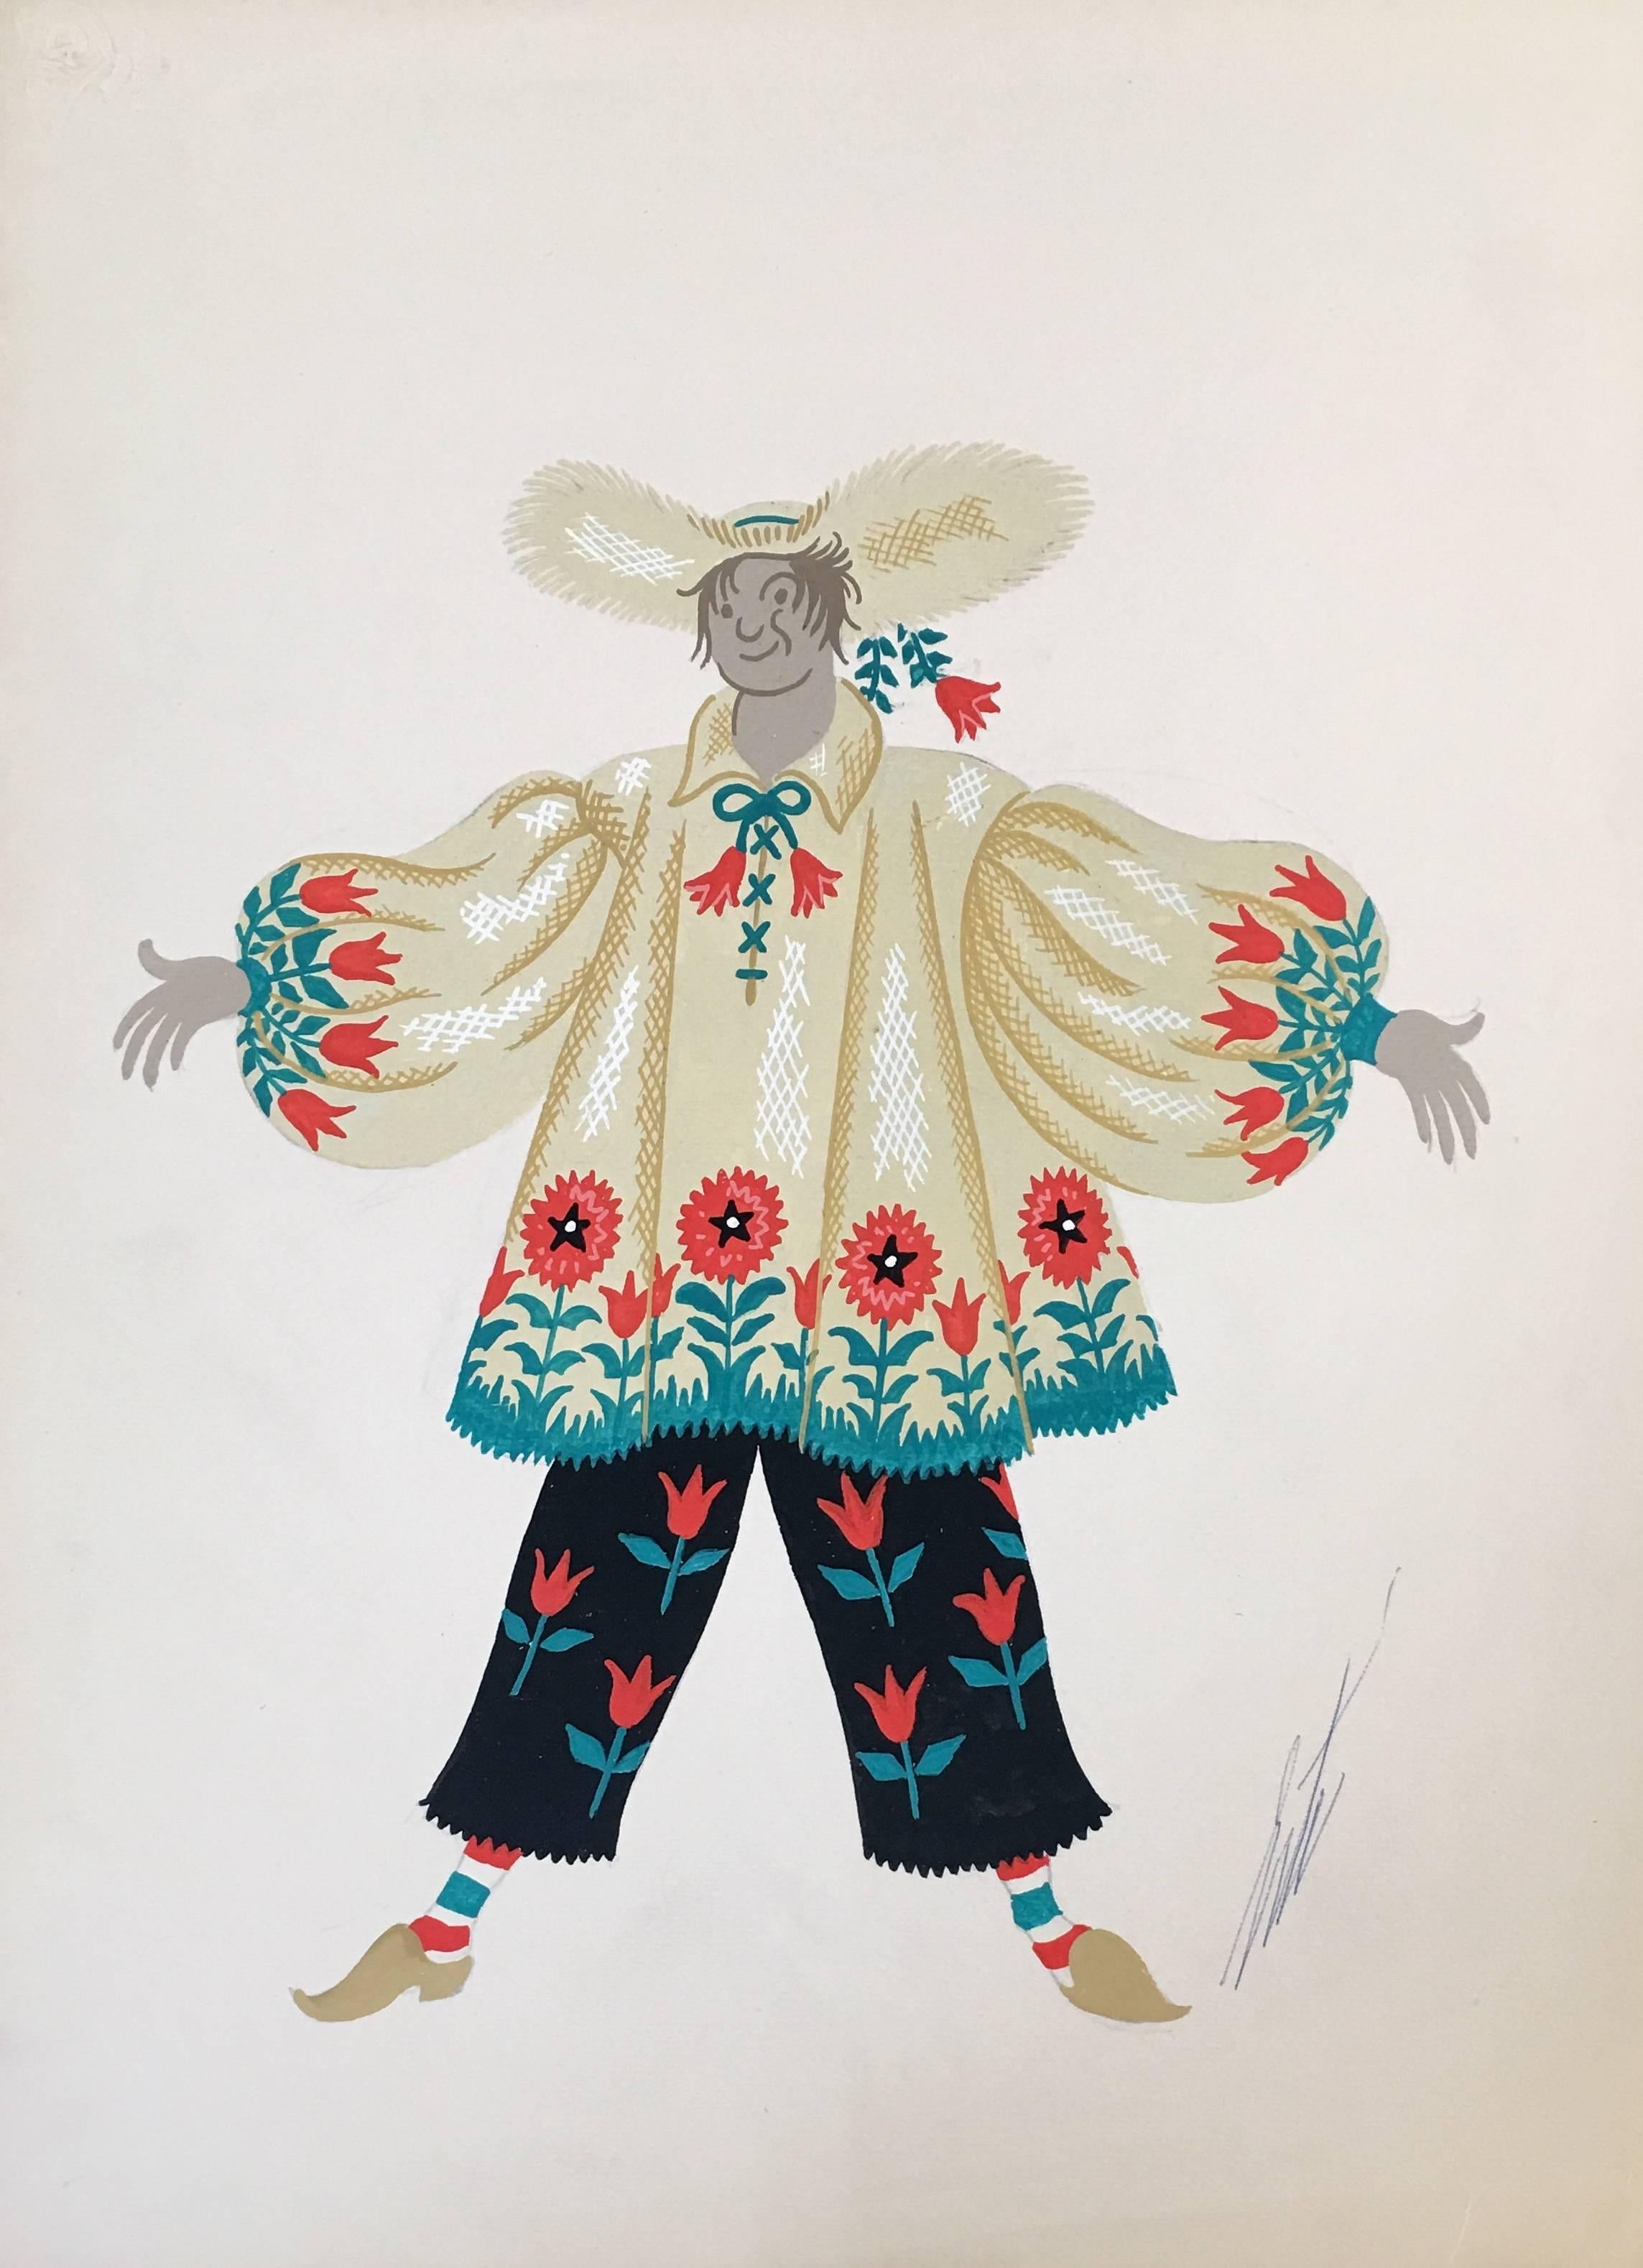 A unique, original gouache on paper by Erté, also known as Romain de Tirtoff. Erté was a vastly diverse artist who excelled in an array of fields including fashion, jewelry, graphic arts, costume and set design for film, theatre, opera, and interior